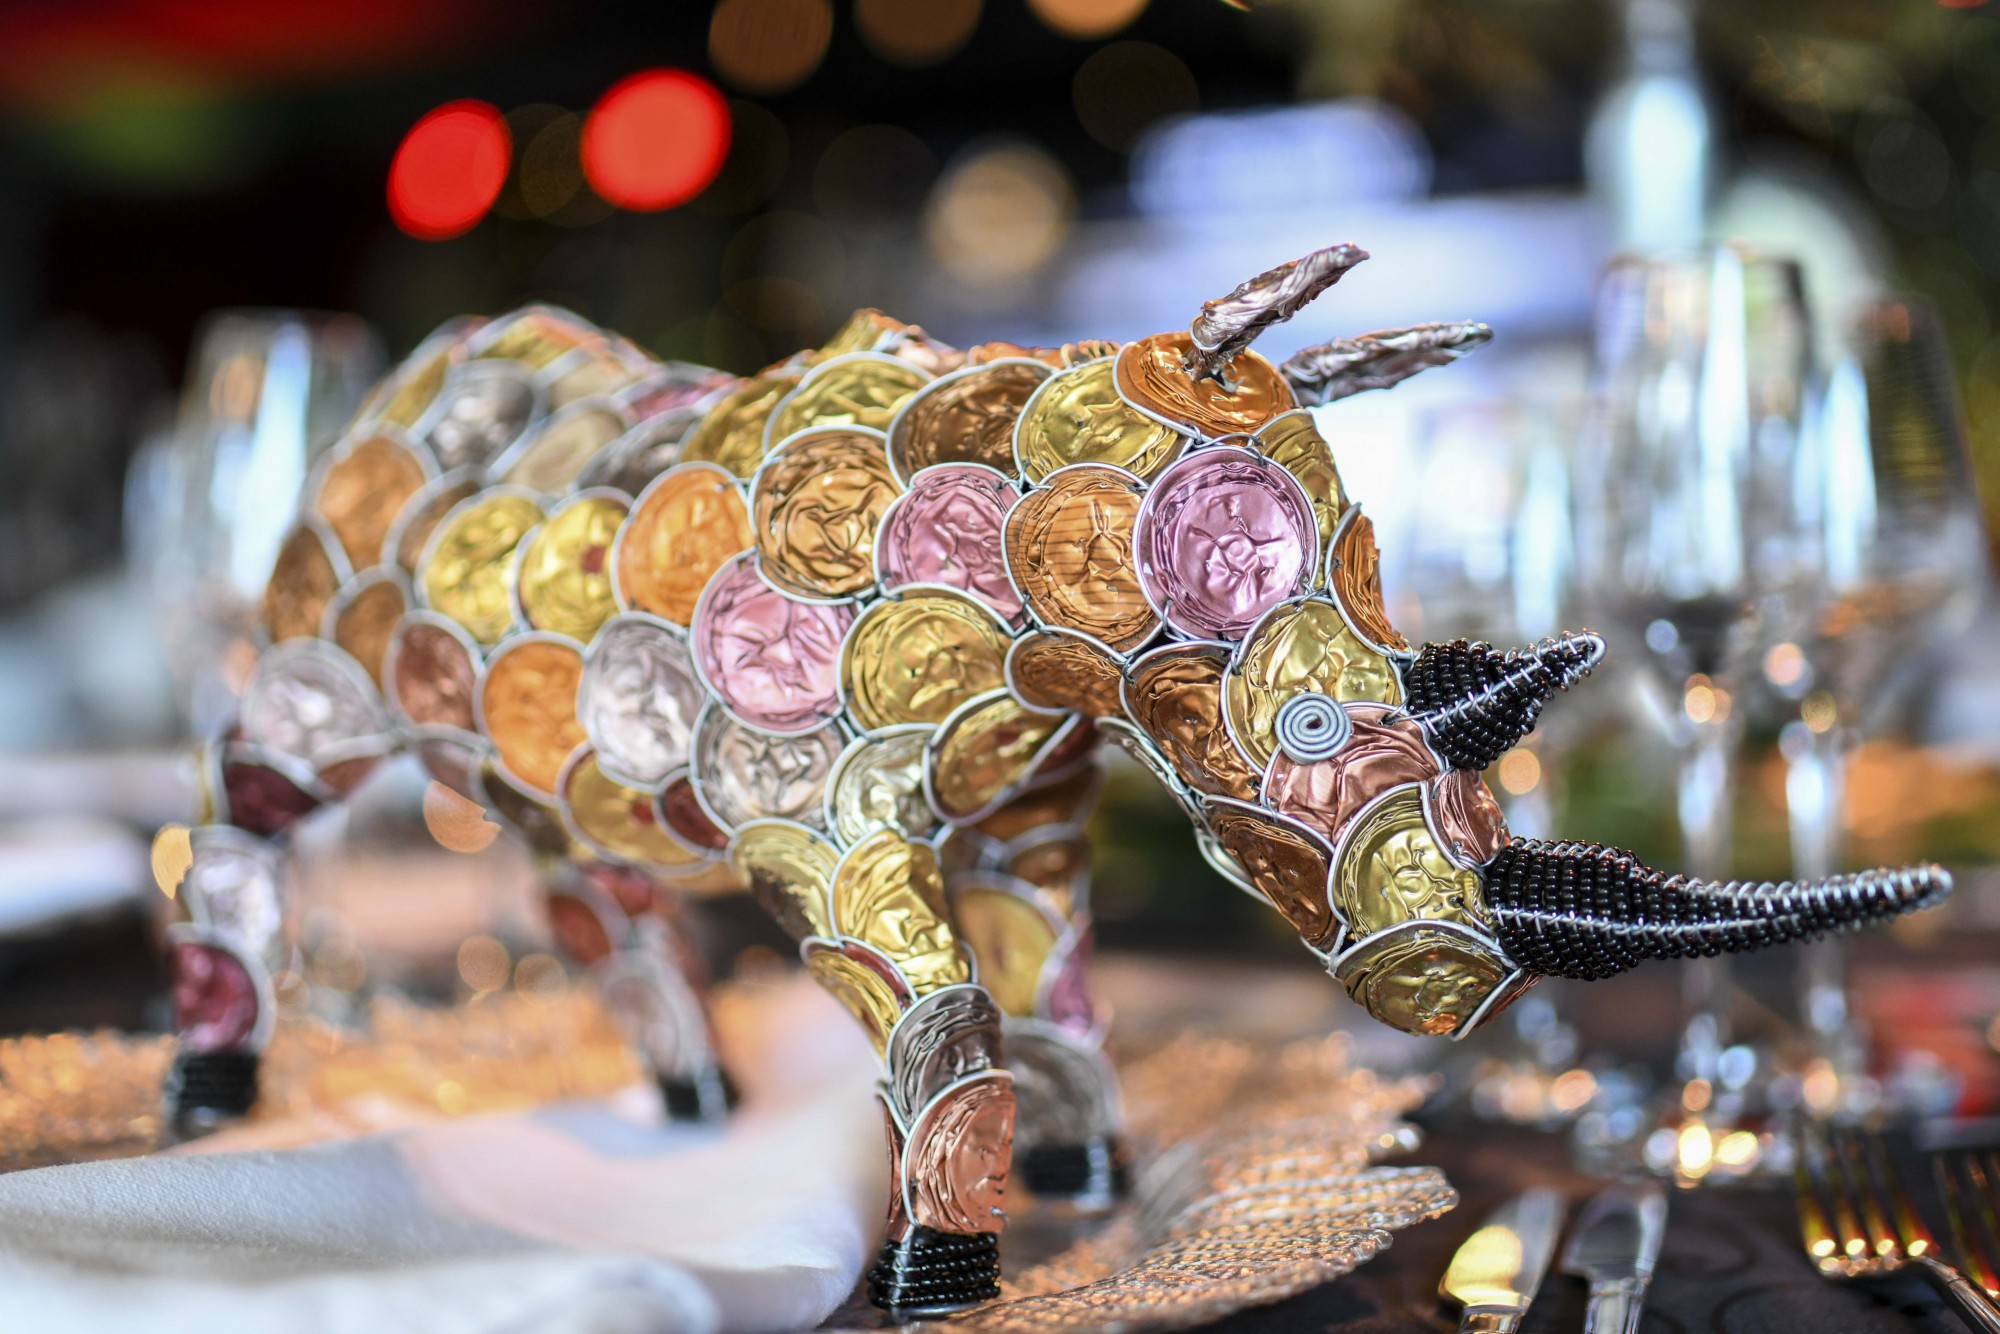 Miniature Rhino made by local artisans from recycled coffee capsules